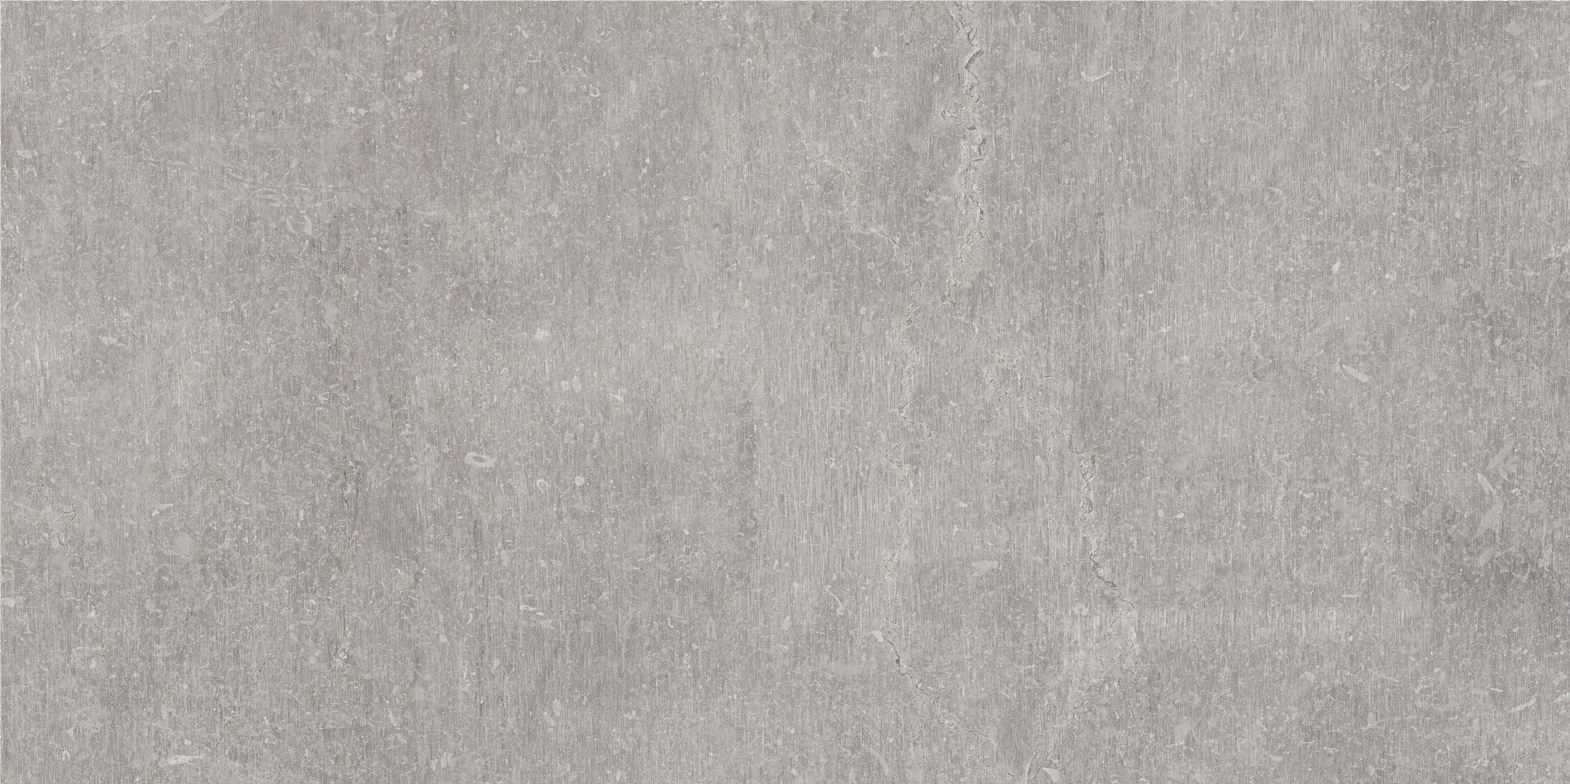 mica pattern glazed porcelain field tile from nexus anatolia collection distributed by surface group international matte finish pressed edge 12x24 rectangle shape